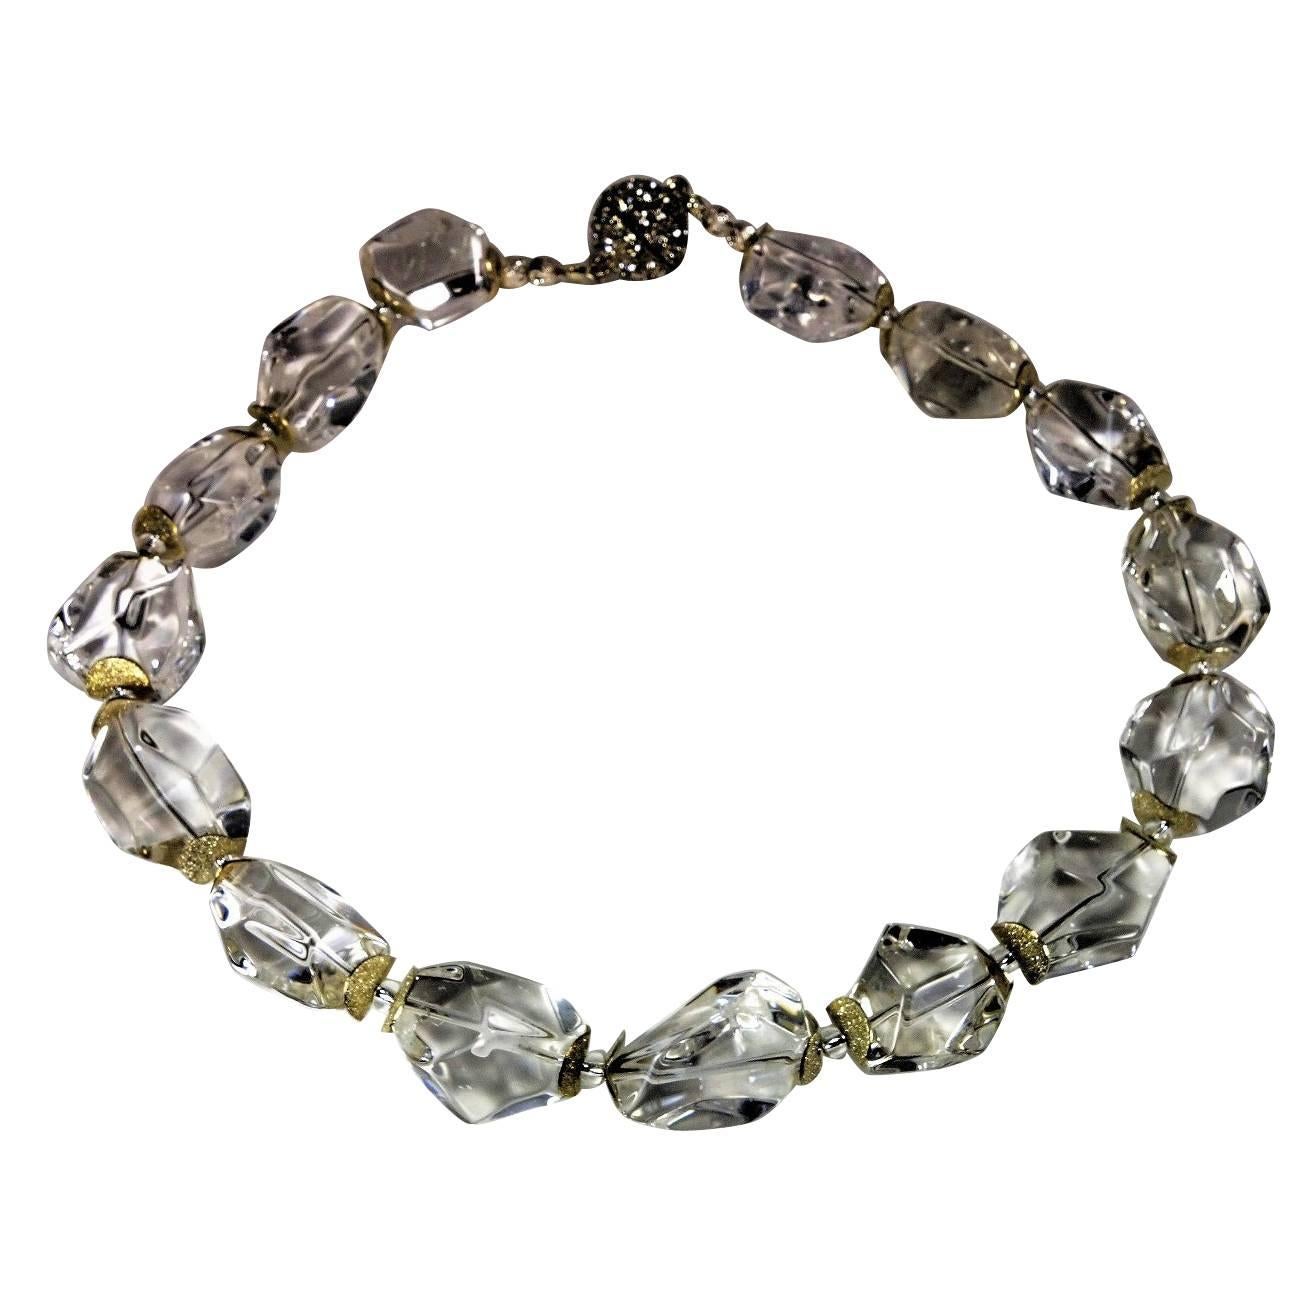 Necklace of Faceted Clear Quartz Crystal Nuggets (approximately 27x22mm).  The nuggets are enhanced with sparkly silver tone flutters and silver Czech beads.  The clasp is a 20mm magnetic sphere with lots of crystal sparkles.  This is a great